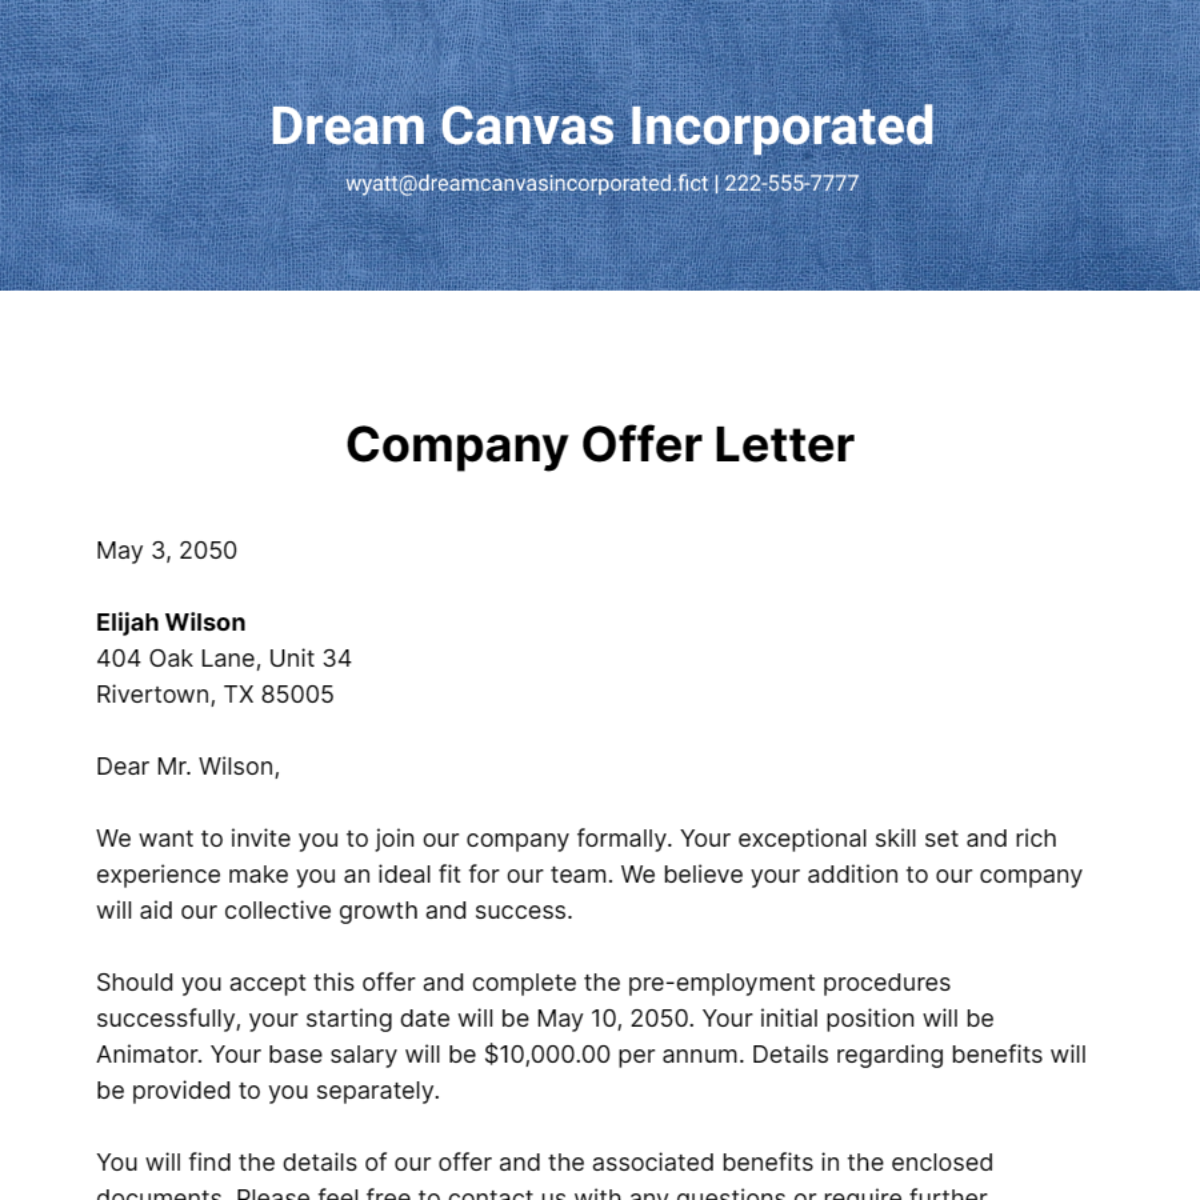 Company Offer Letter Template